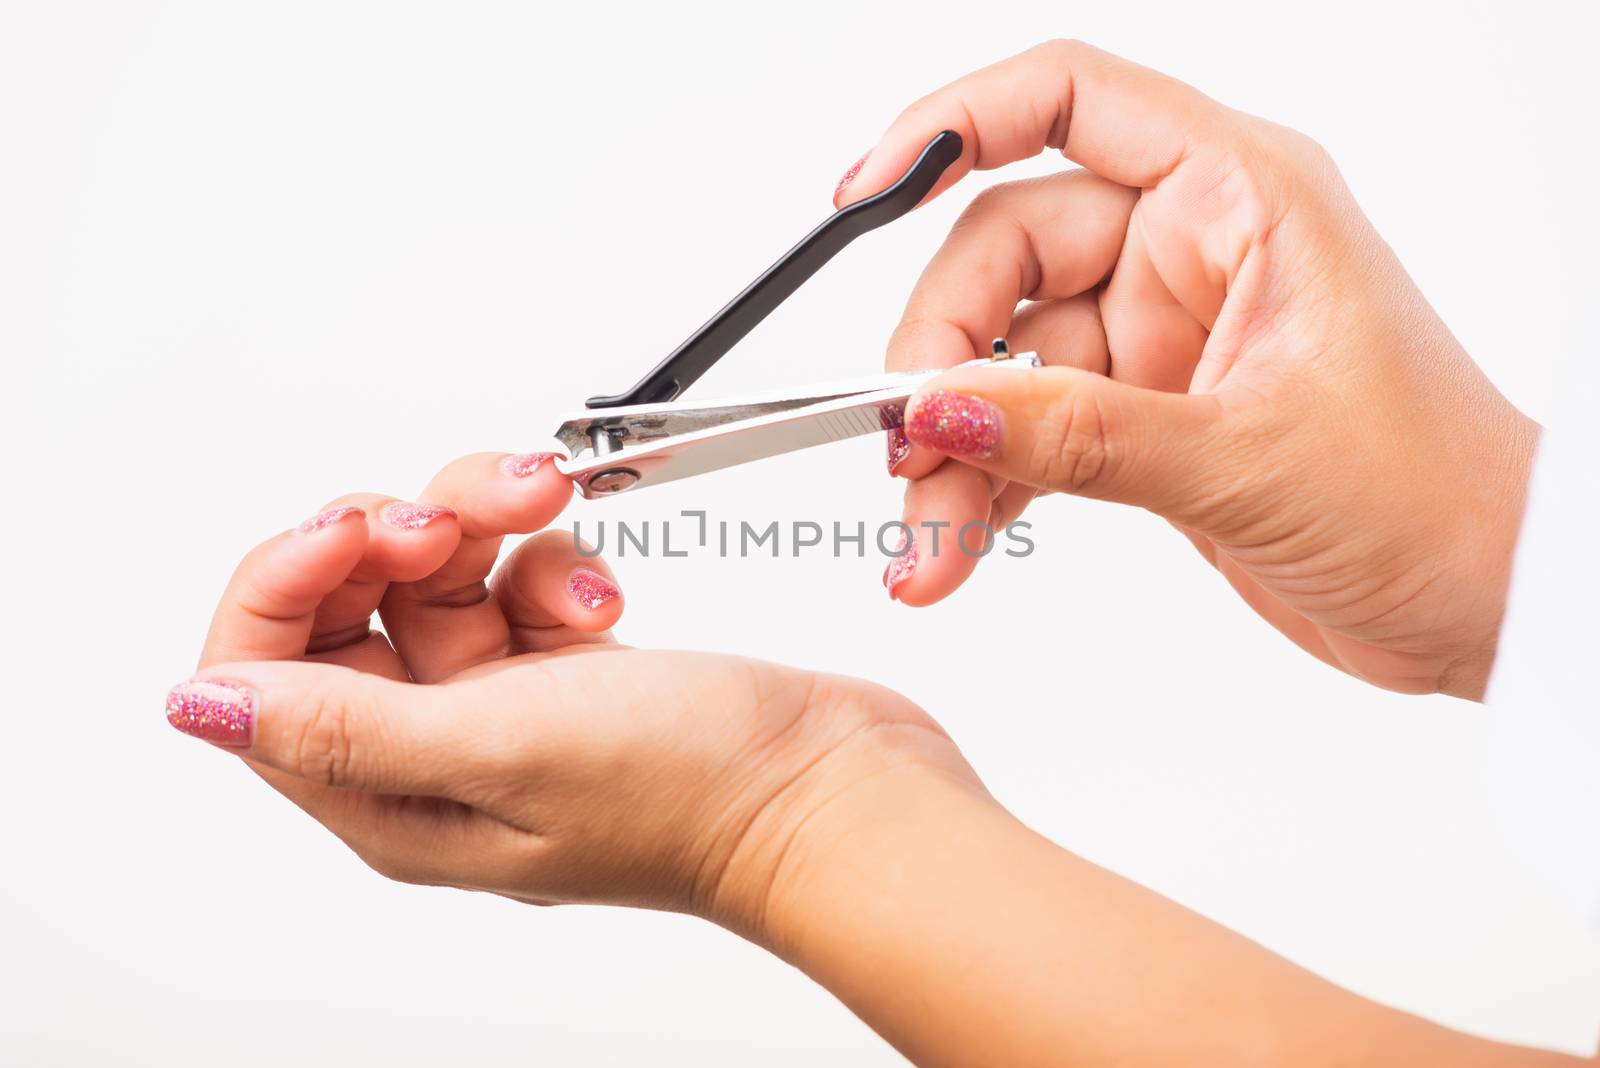 Woman cutting nails on finger using a nail clipper by Sorapop